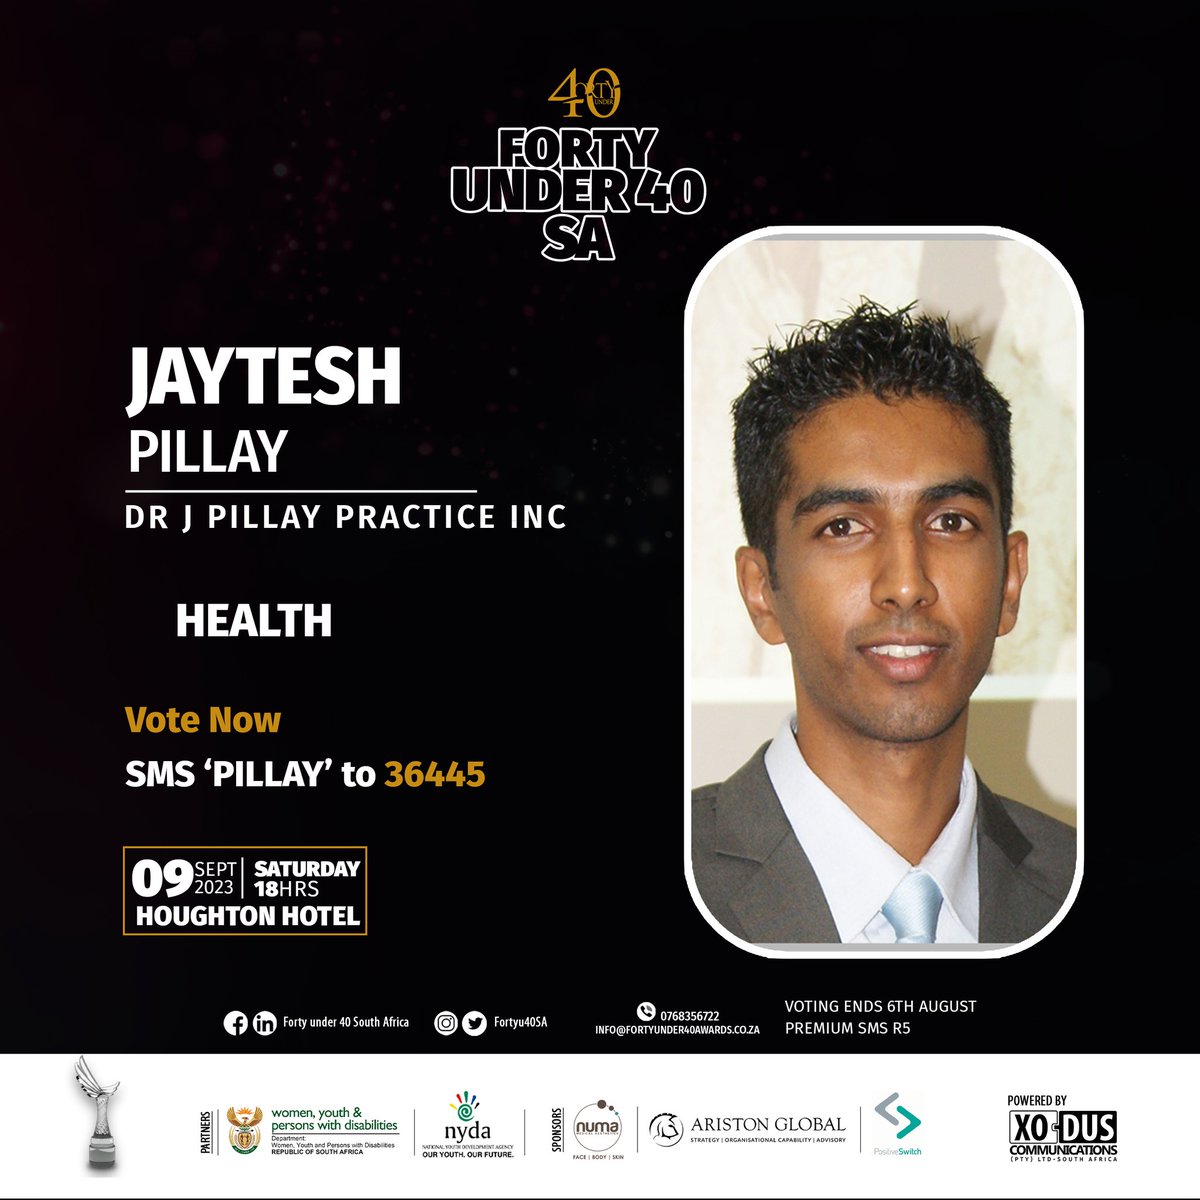 Profile of Your Nominee For Health;

Jaytesh Pillay (Dr J Pillay Practice Inc) 

Jaytesh Pillay had his University education at theUniversity of Pretoria, where he obatined a degree in MBChB with distinctions in Diagnostic Medicine, Urology and Psychiatry in 2006.

He had his